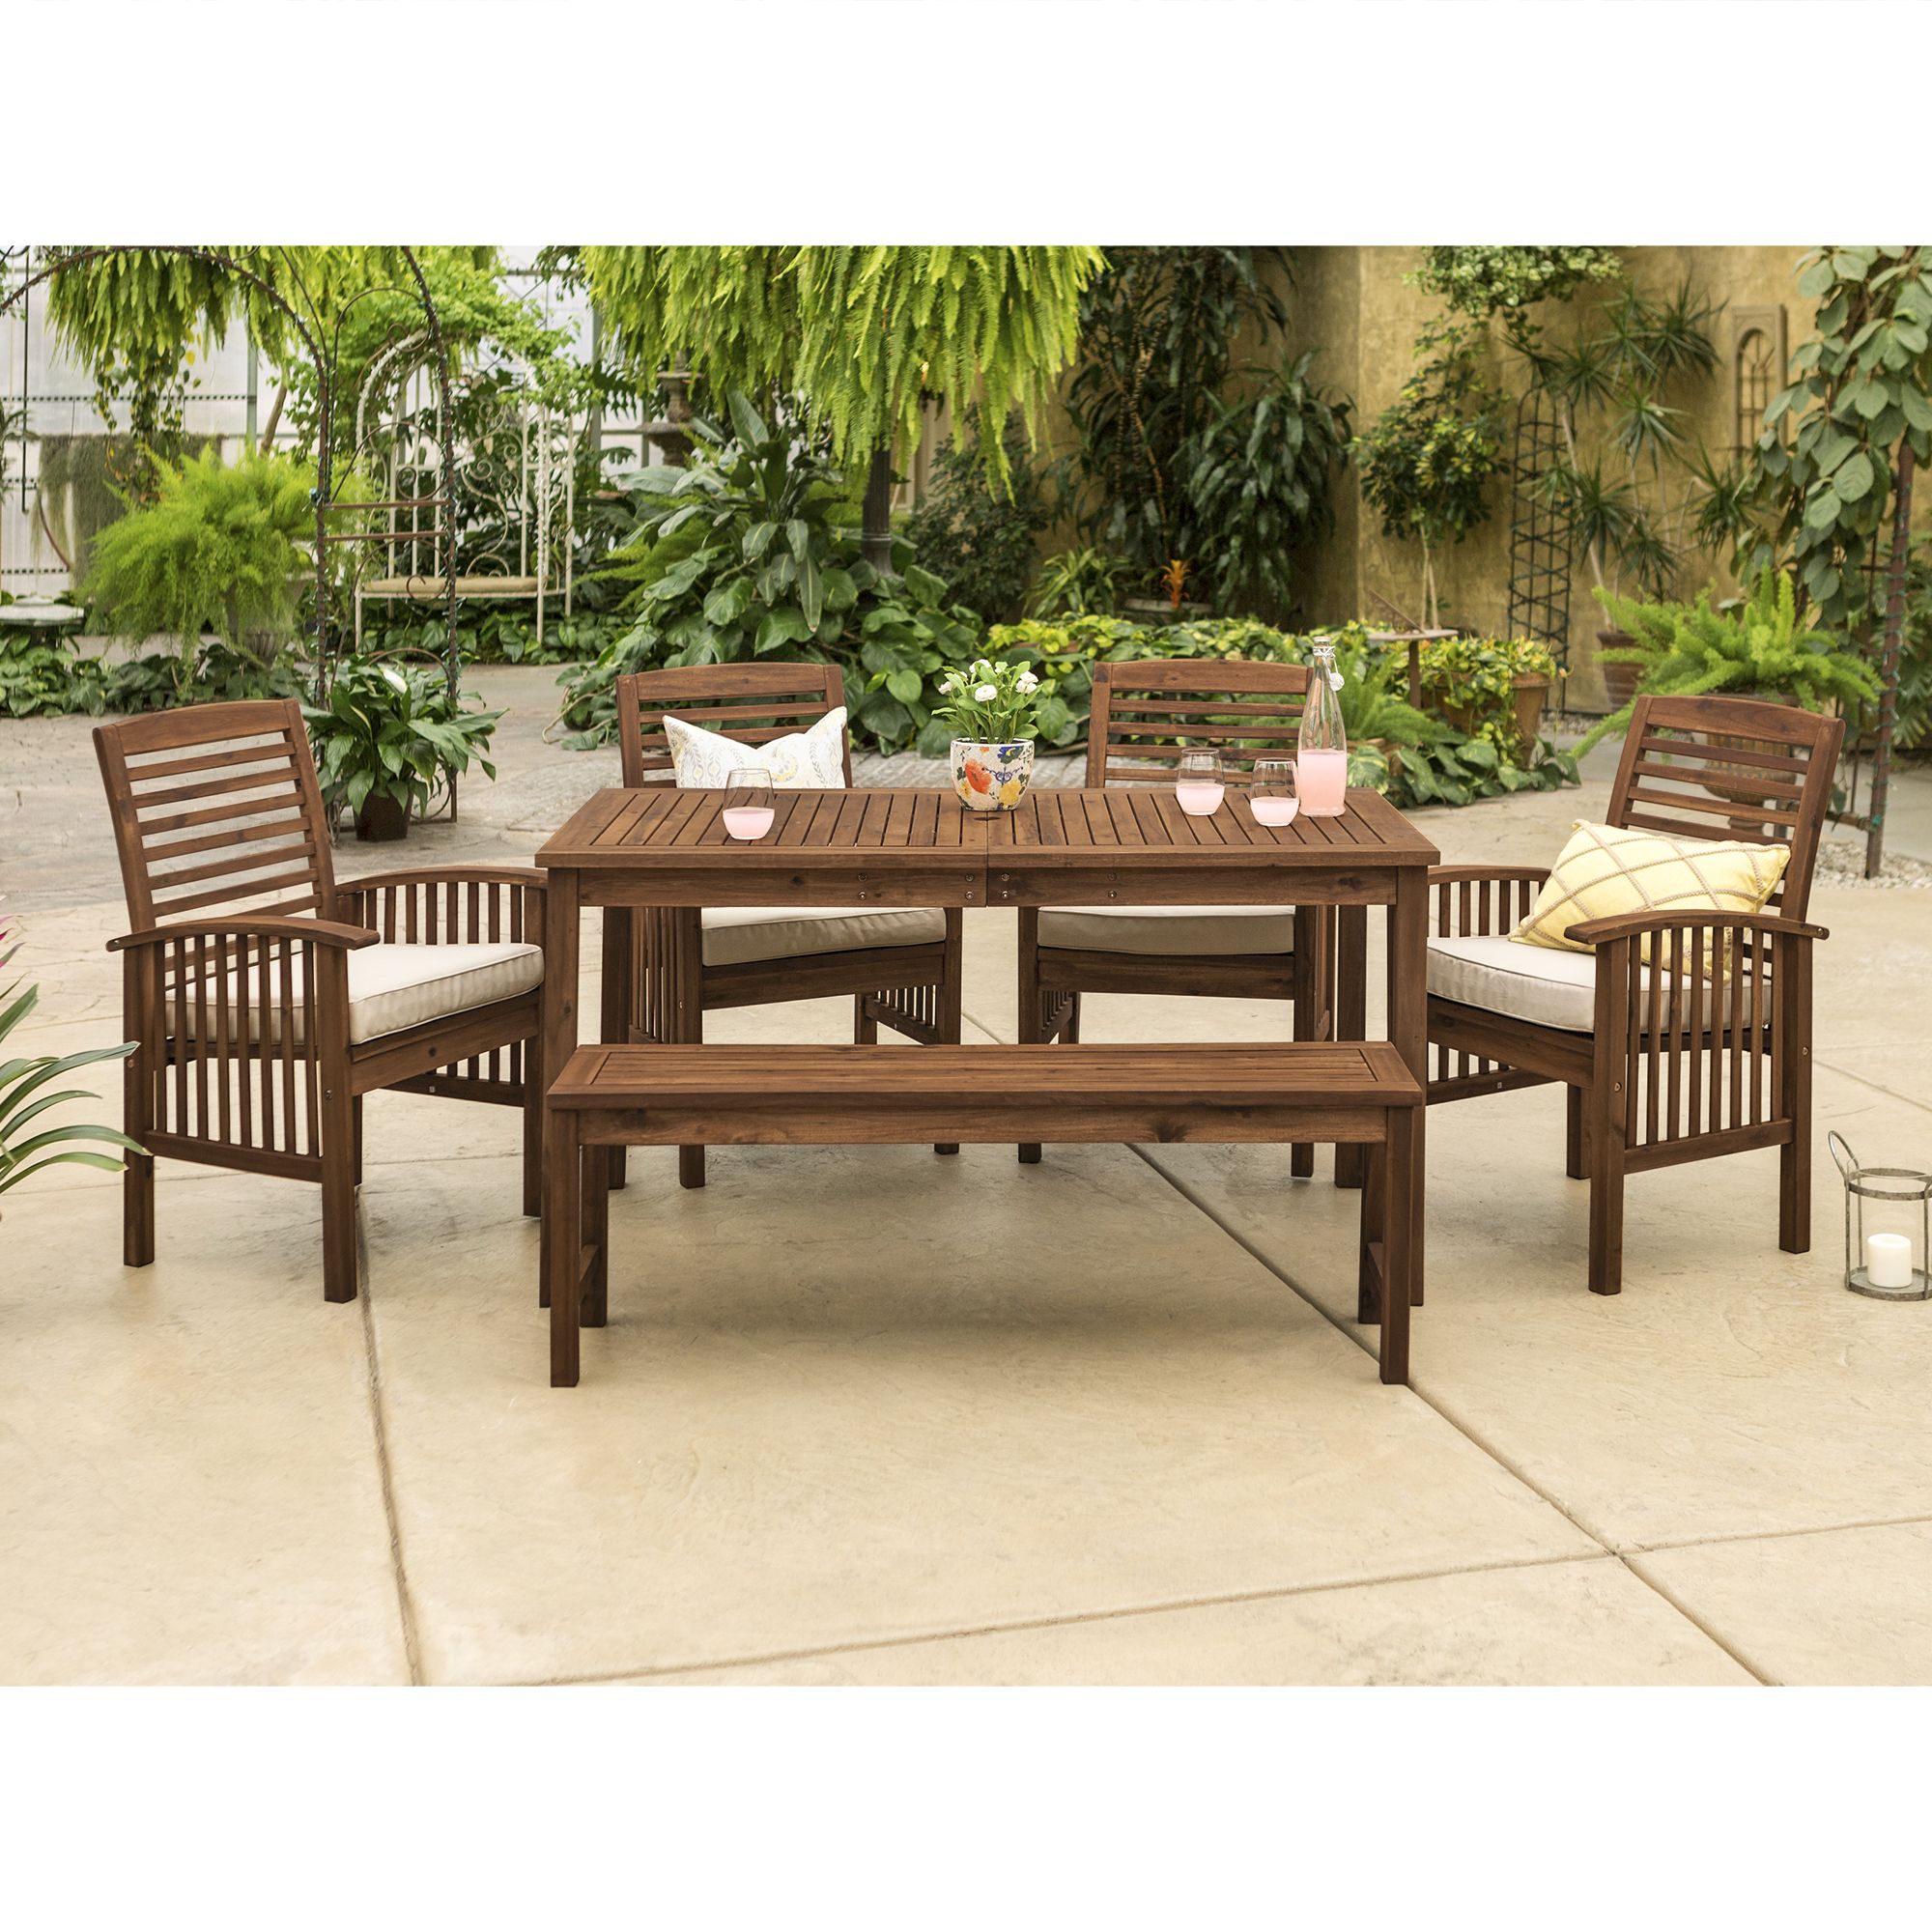 Most Current Manor Park 6 Piece Outdoor Patio Dining Set – Dark Brown – Walmart For Dark Brown Patio Dining Sets (View 6 of 15)